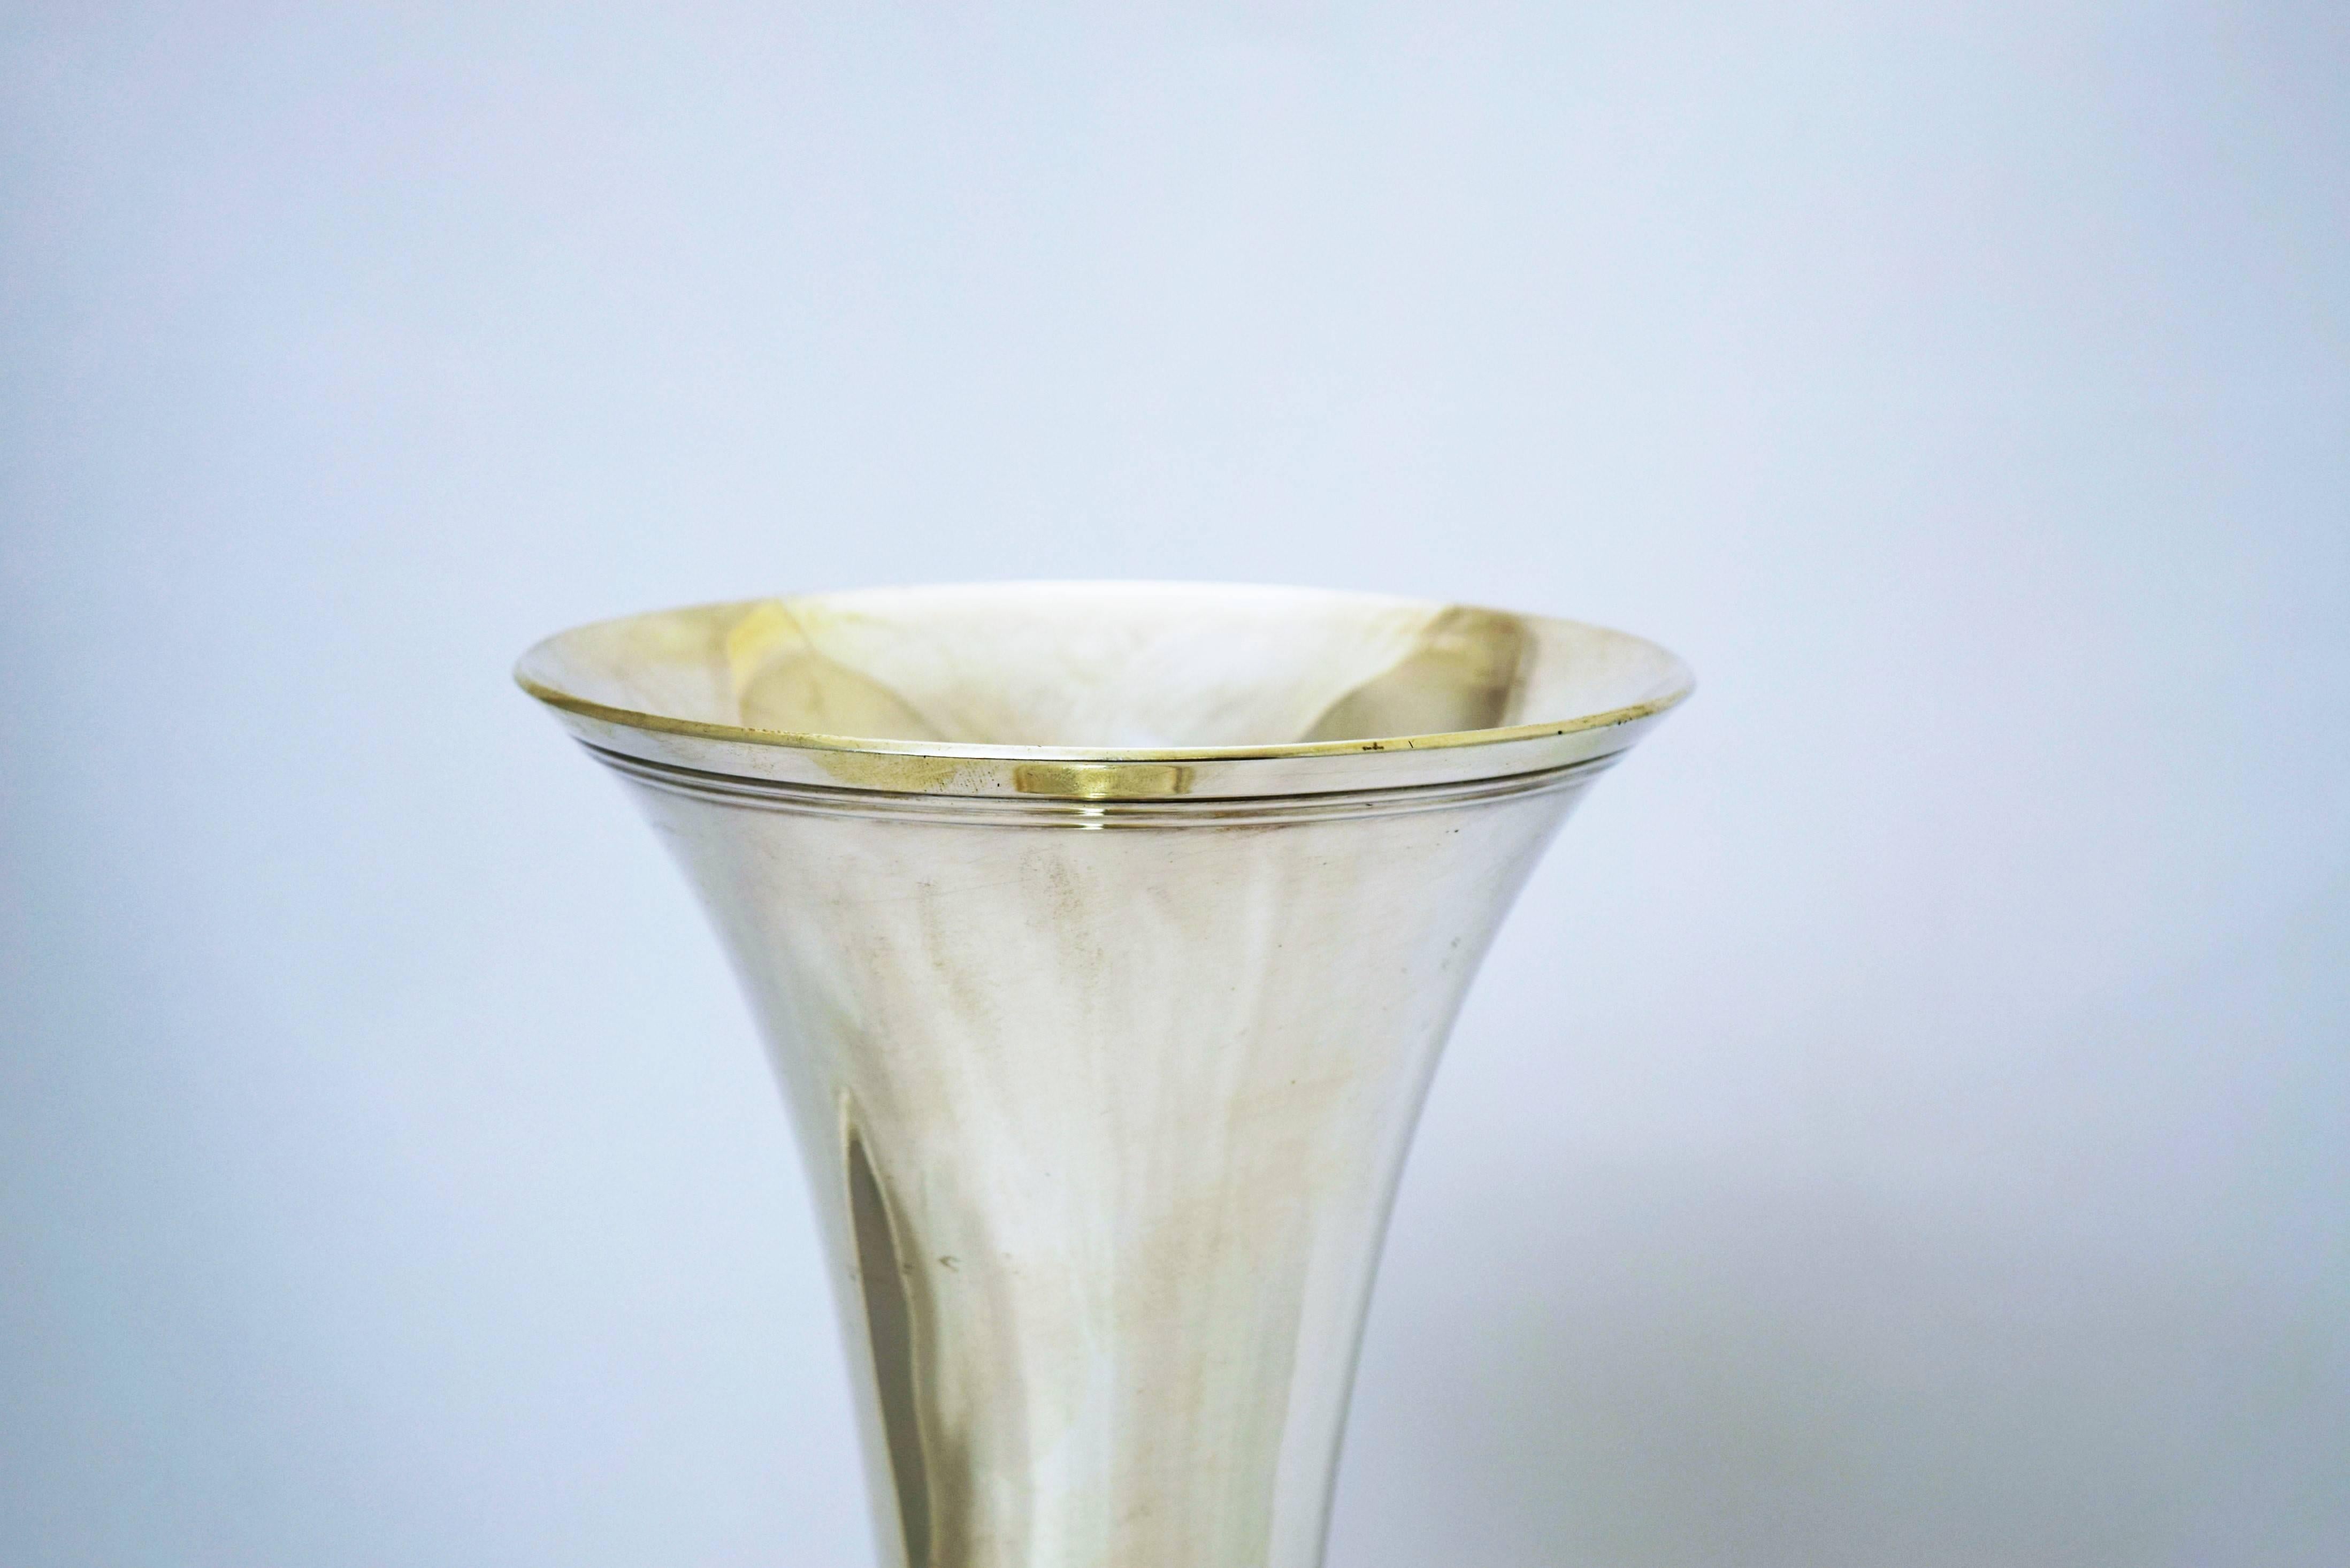 Being offered is a sterling silver vase made by Tiffany & Co. of New York. Trumpet form with a simple modernist design, circa 1915. Dimensions: 14 inches tall. Weight 20 troy ounces. Marked as illustrated. In excellent condition.